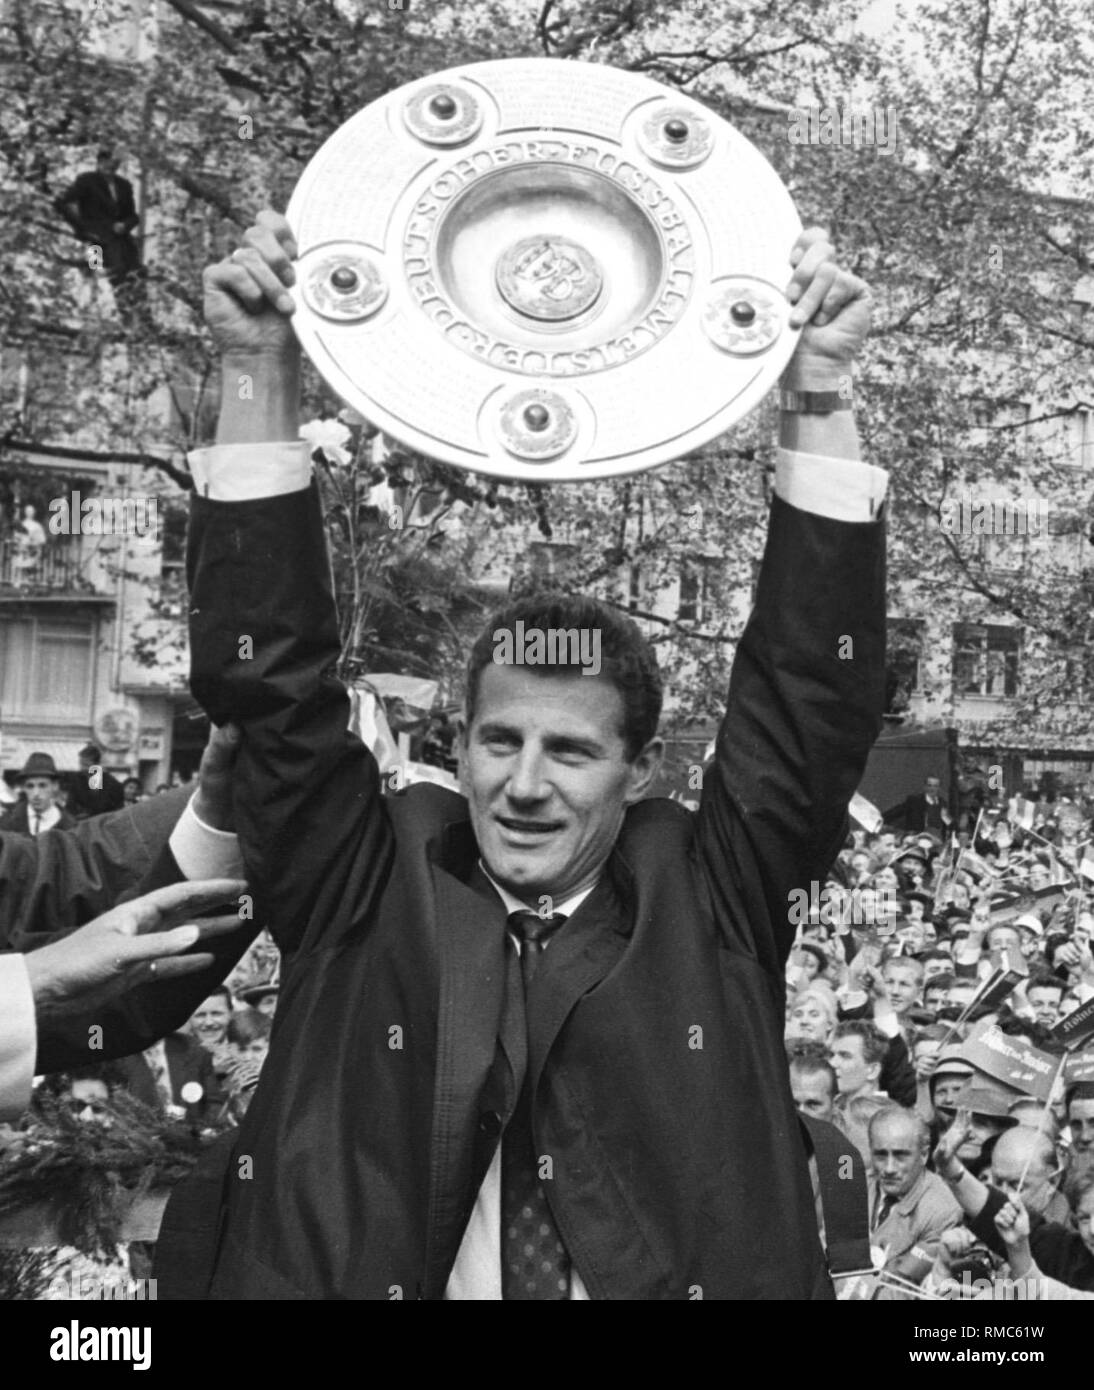 Hans Schaefer with the Meisterschale 1962 in Cologne. Stock Photo